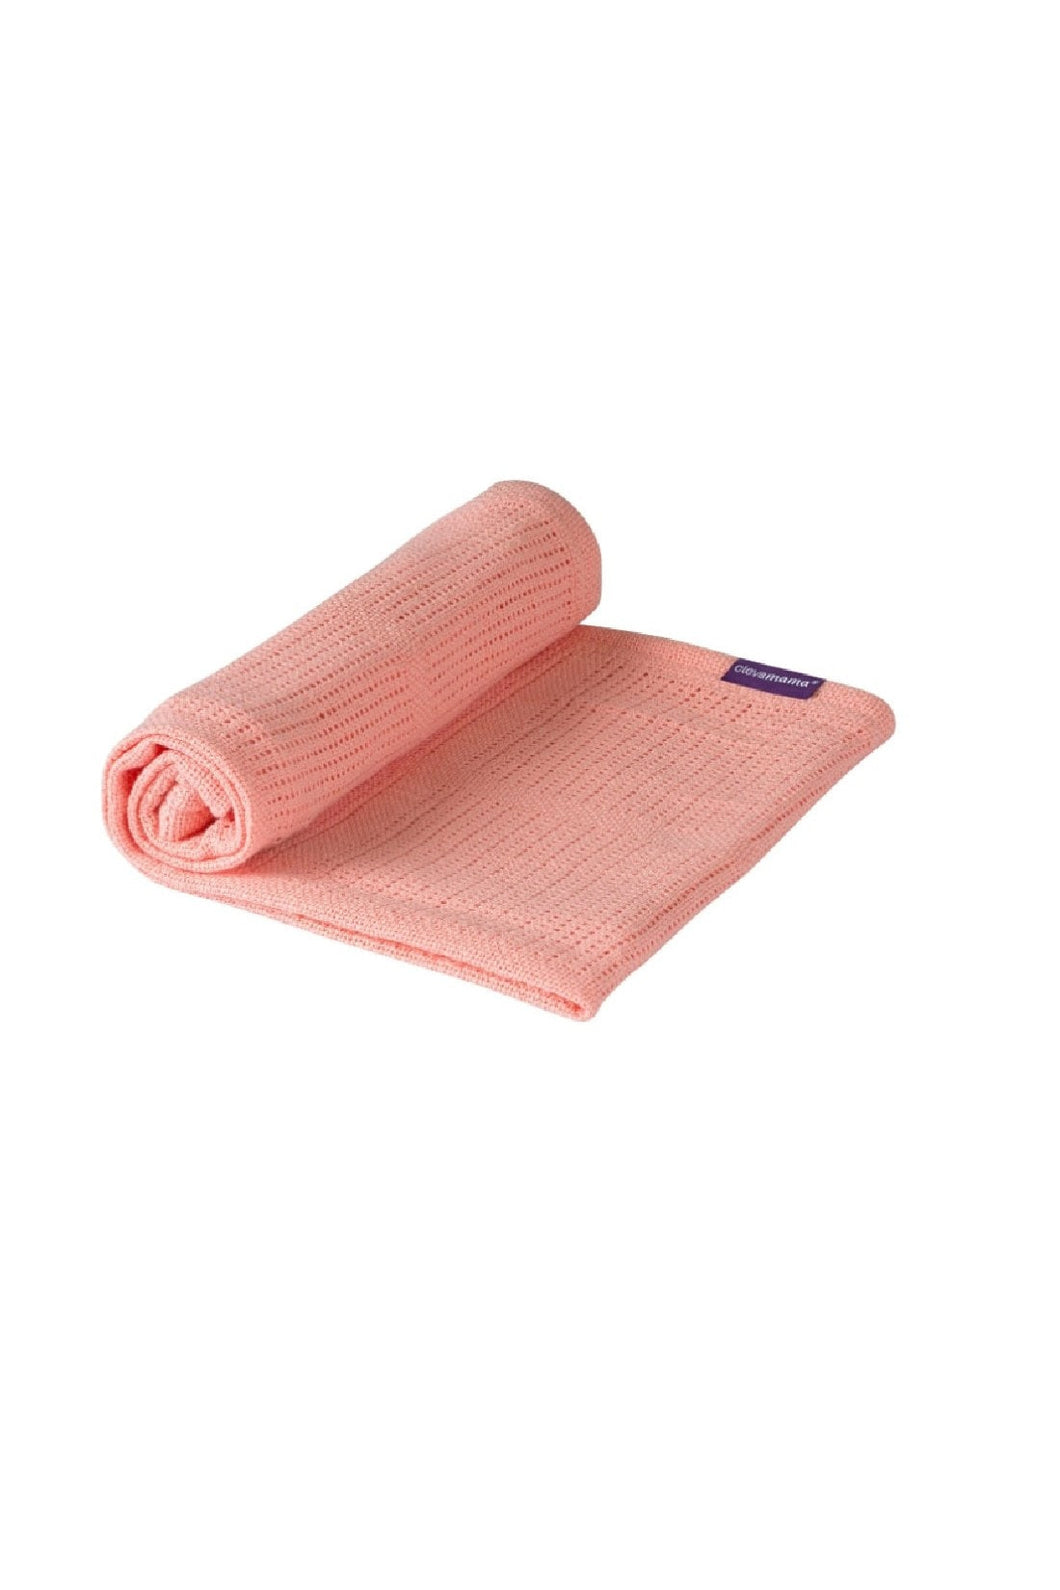 Clevamam Cellular Baby Blanket Cot Cot Bed 120 X 140 Cm Coral 1